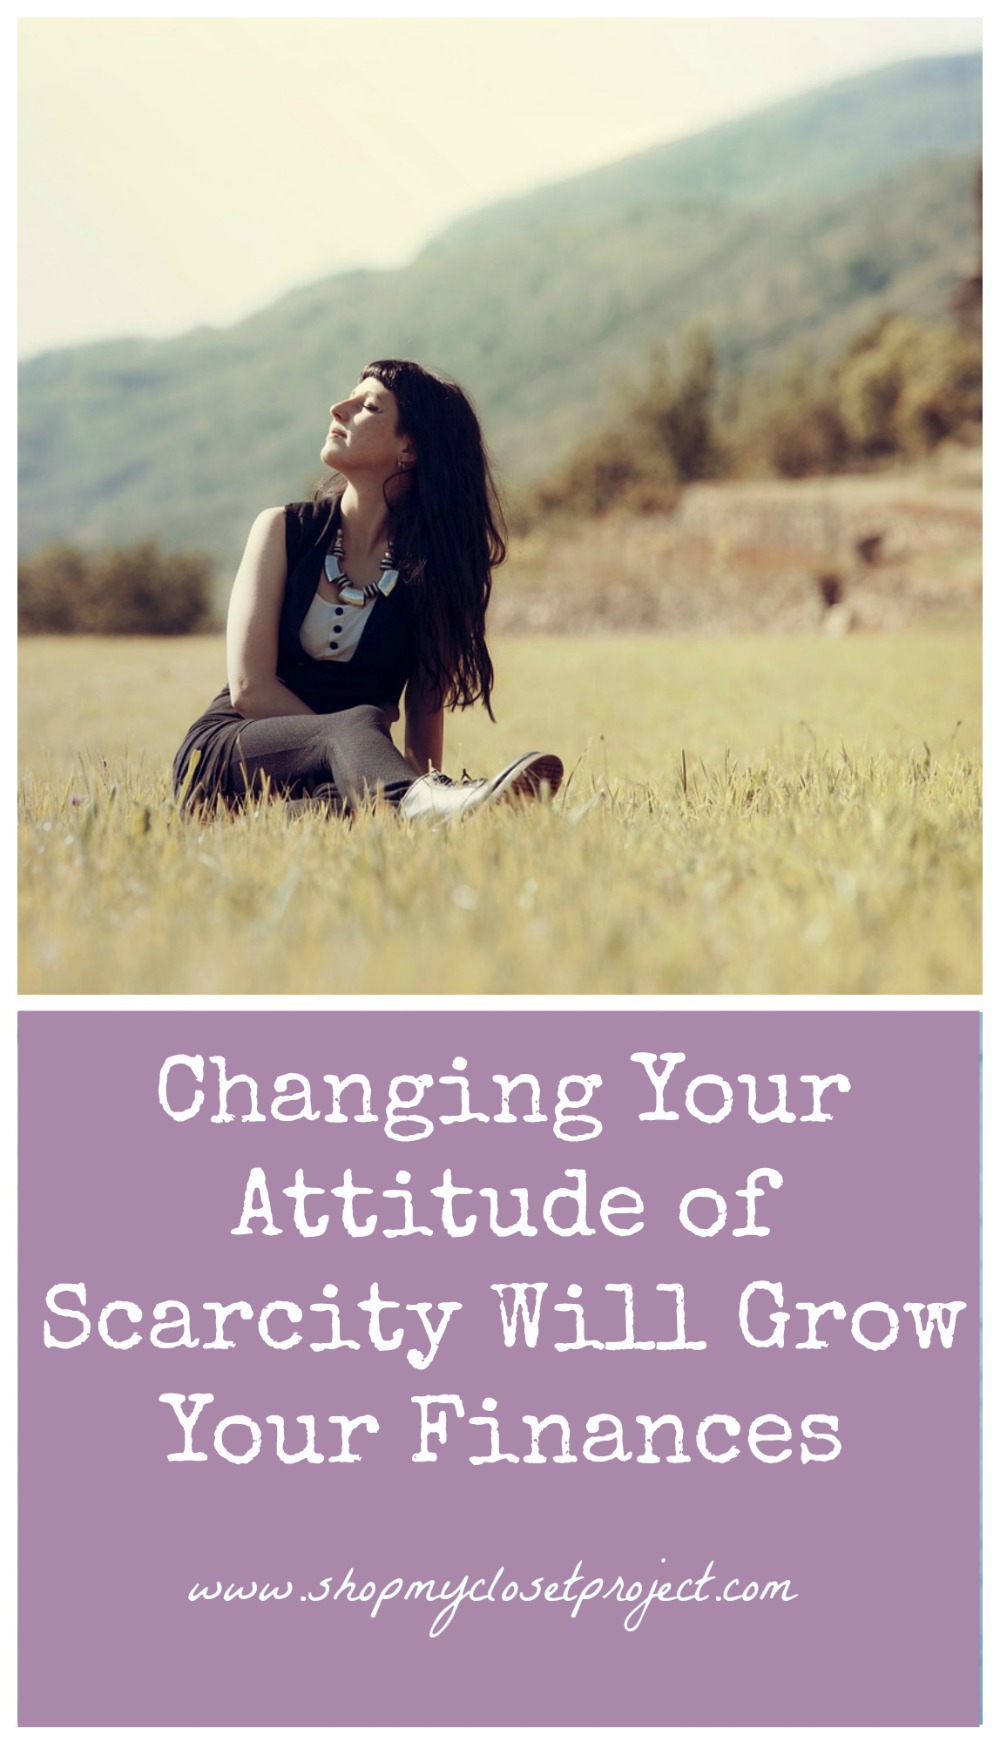 Changing Your Attitude of Scarcity Will Grow Your Finances